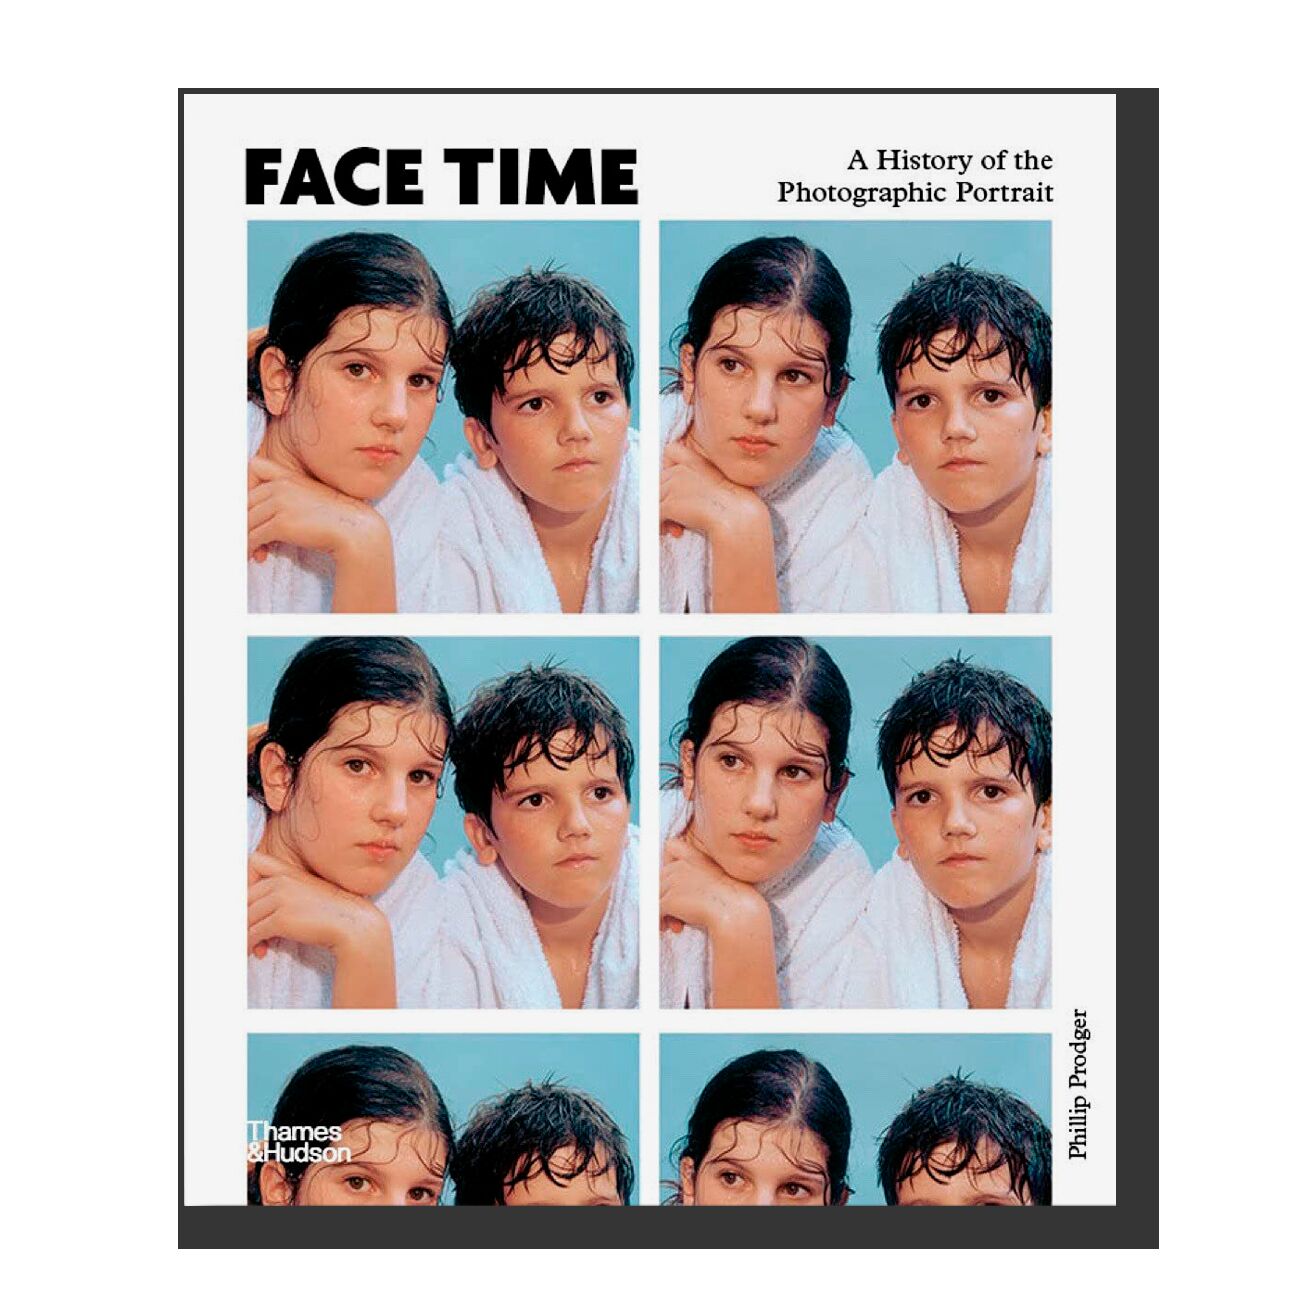 Face Time: A History of the Photographic Portrait